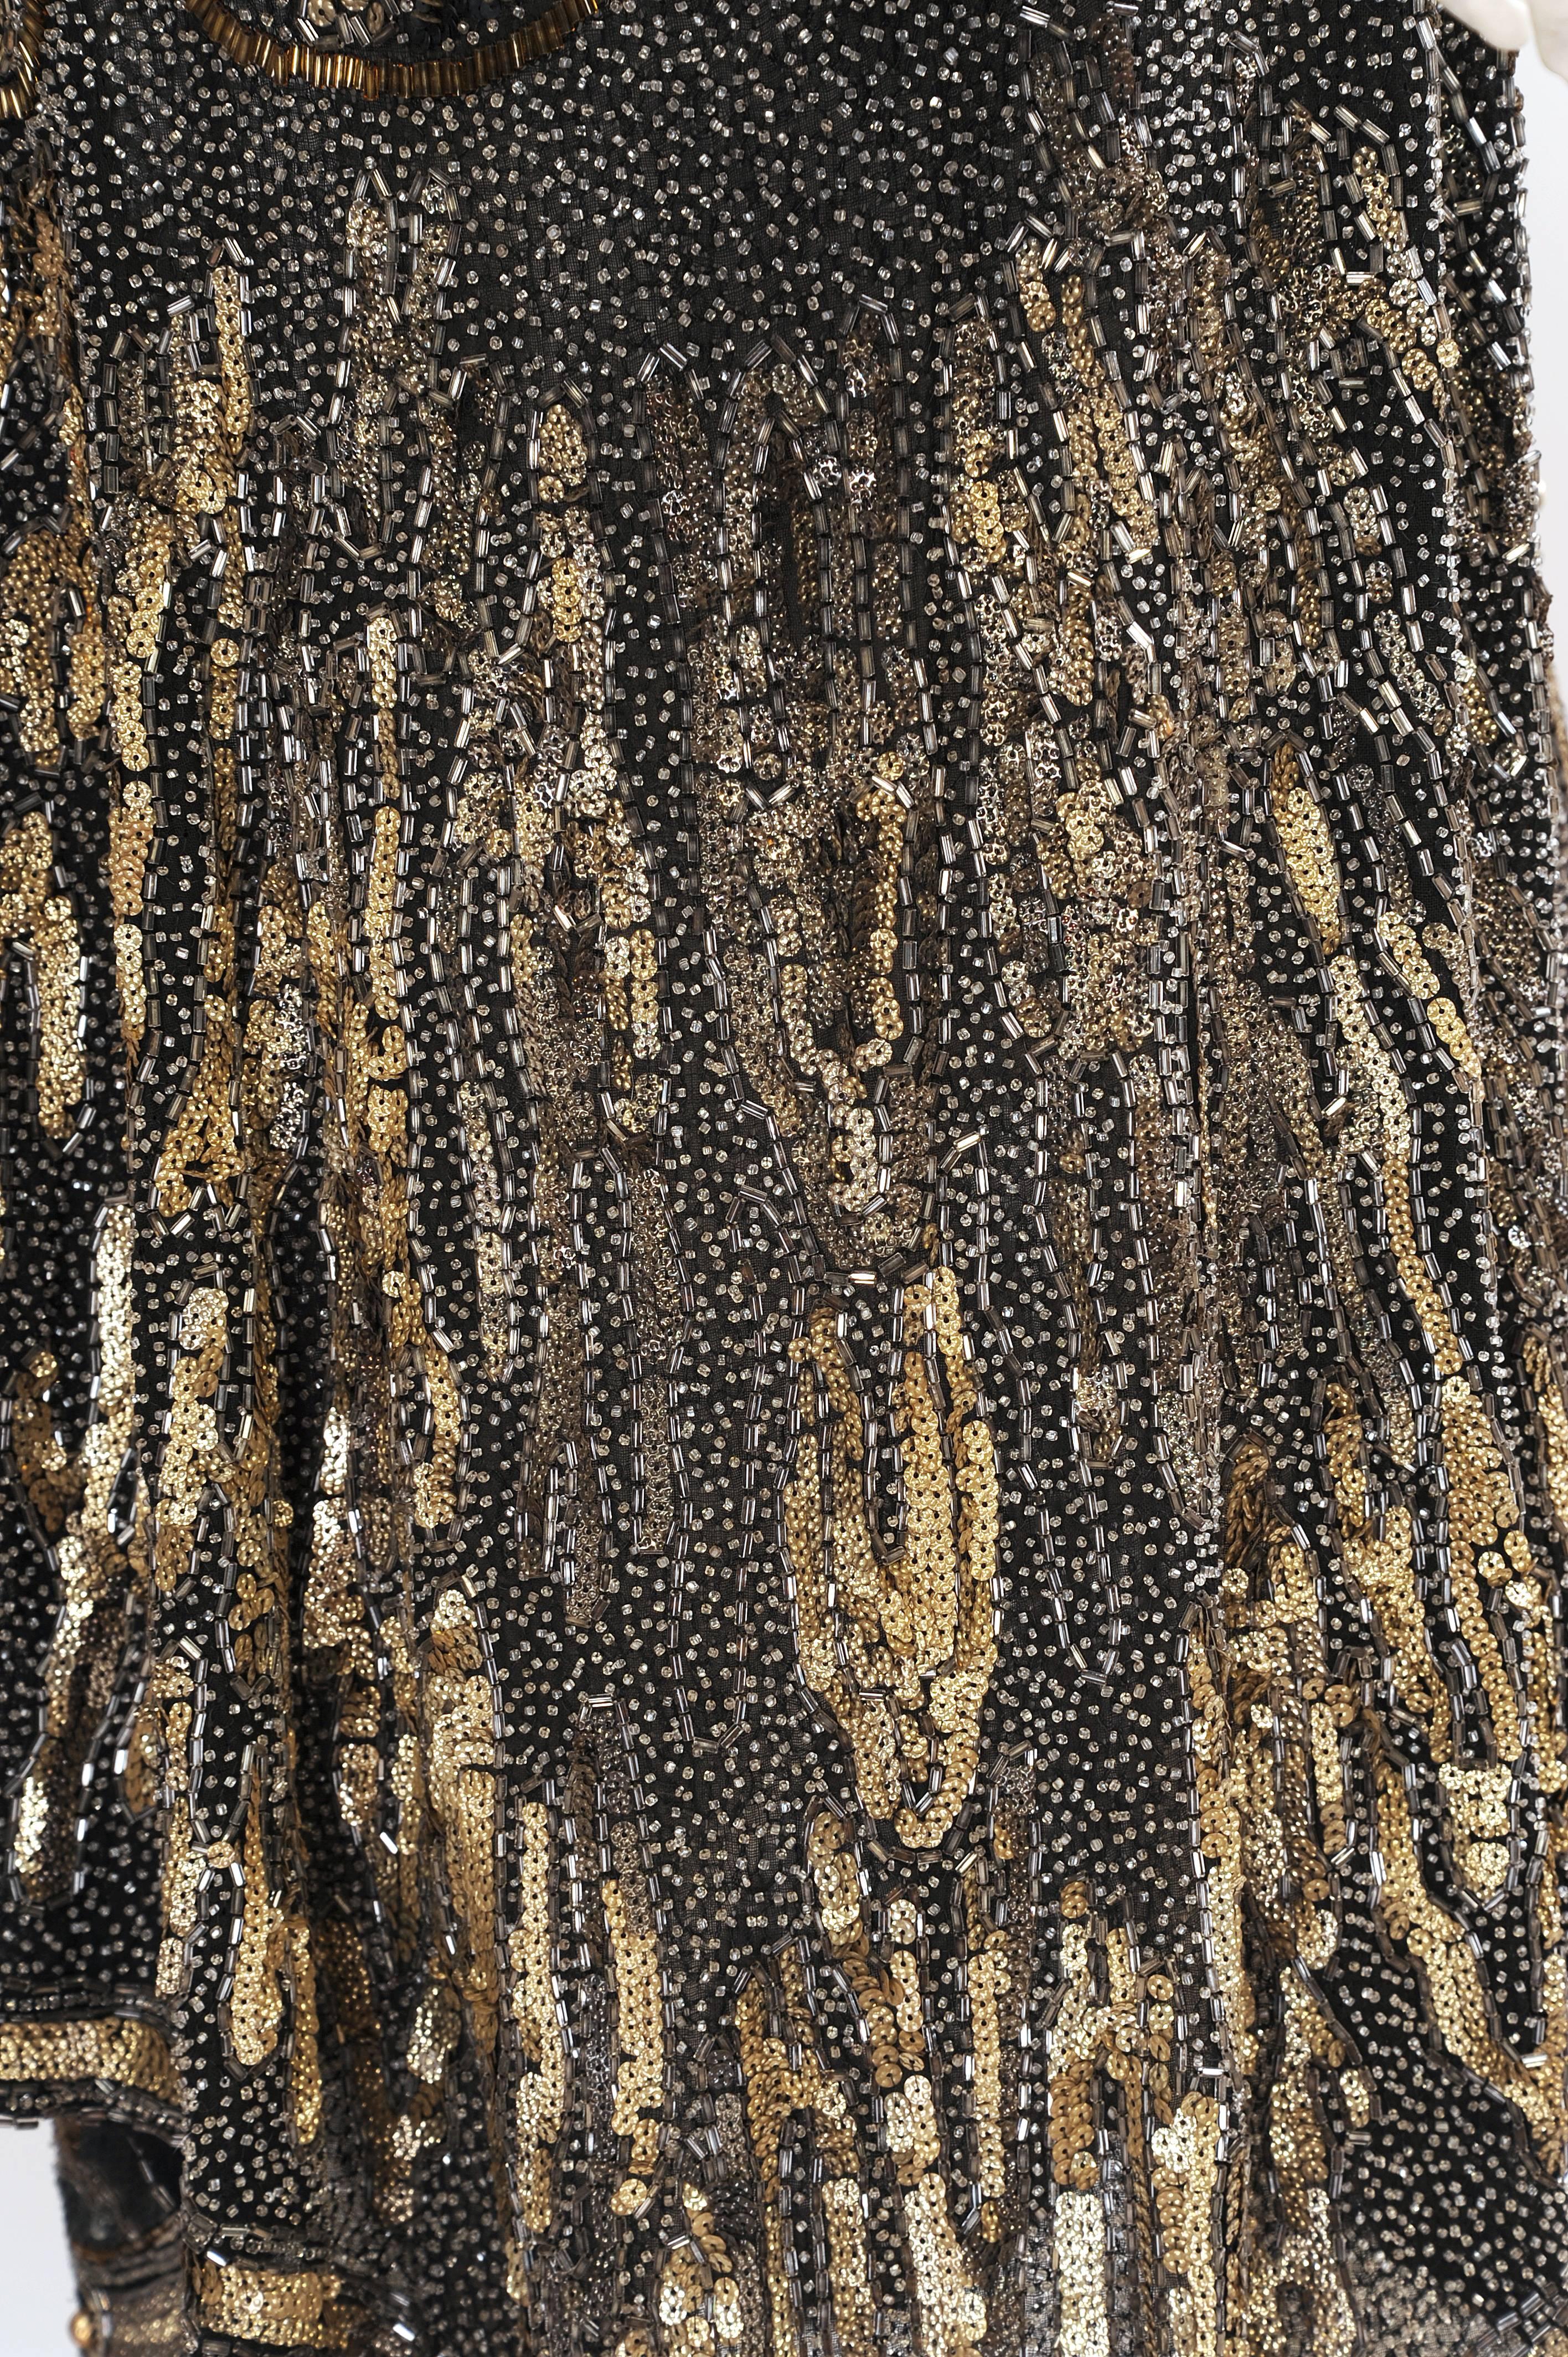 Women's Art Deco 1920's Black and Gold Evening Dress, Hand Beaded, Larger Size